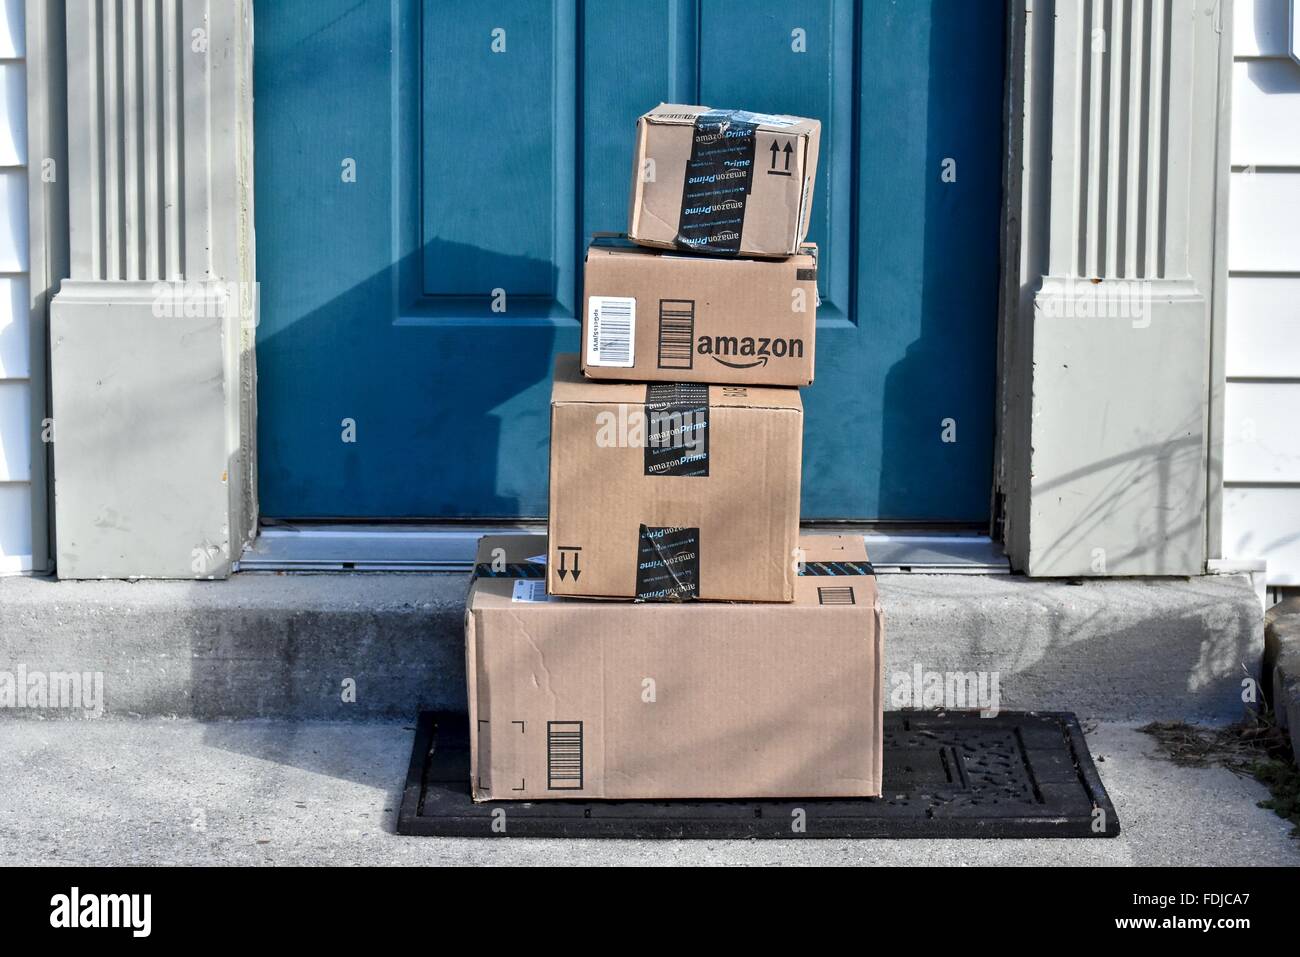 Amazon boxes delivered to a house. Stock Photo